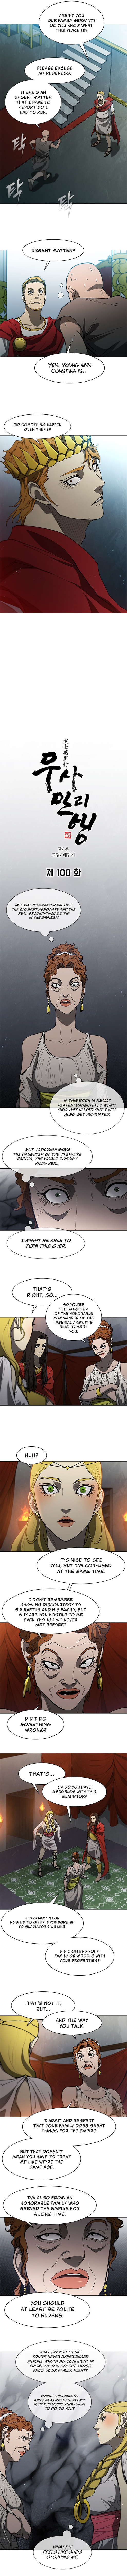 The Long Way Of The Warrior - Chapter 100 Page 3